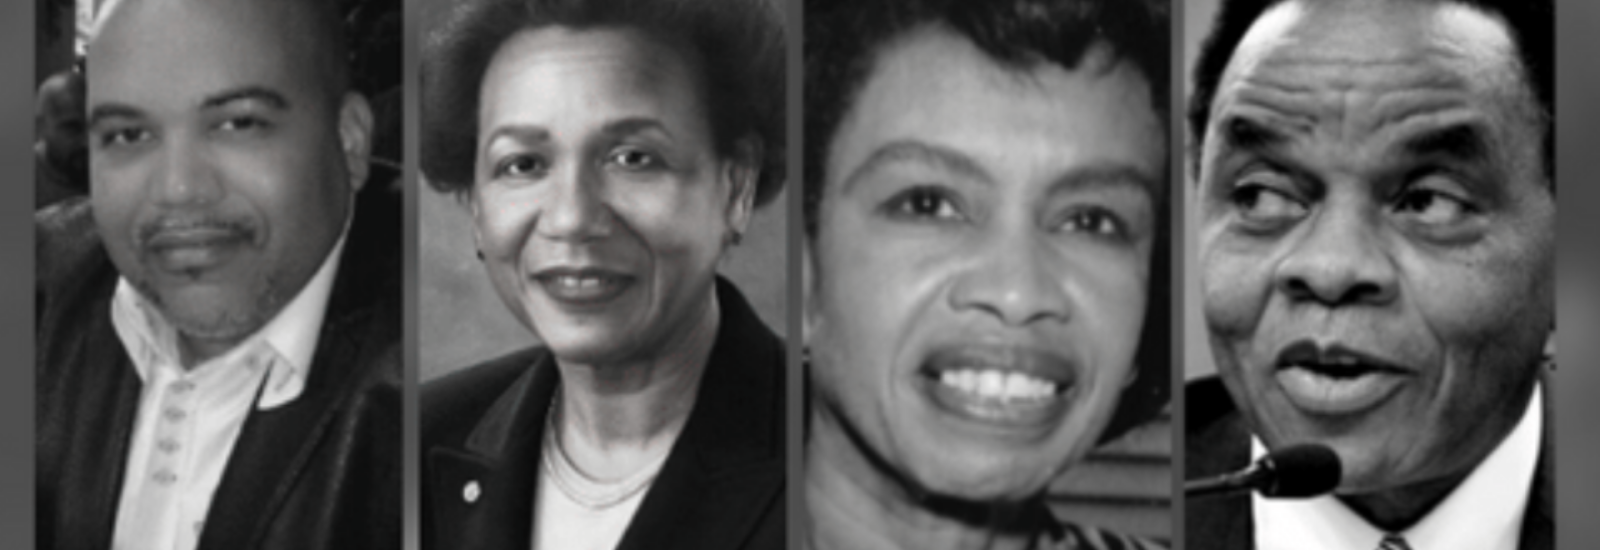 Collage of Black Math PhD Alumni from Ohio State in Black and White. From left to right: William McWorter, Jr., Carolyn Mahoney, Thyrsa Svager, Charles Chidume